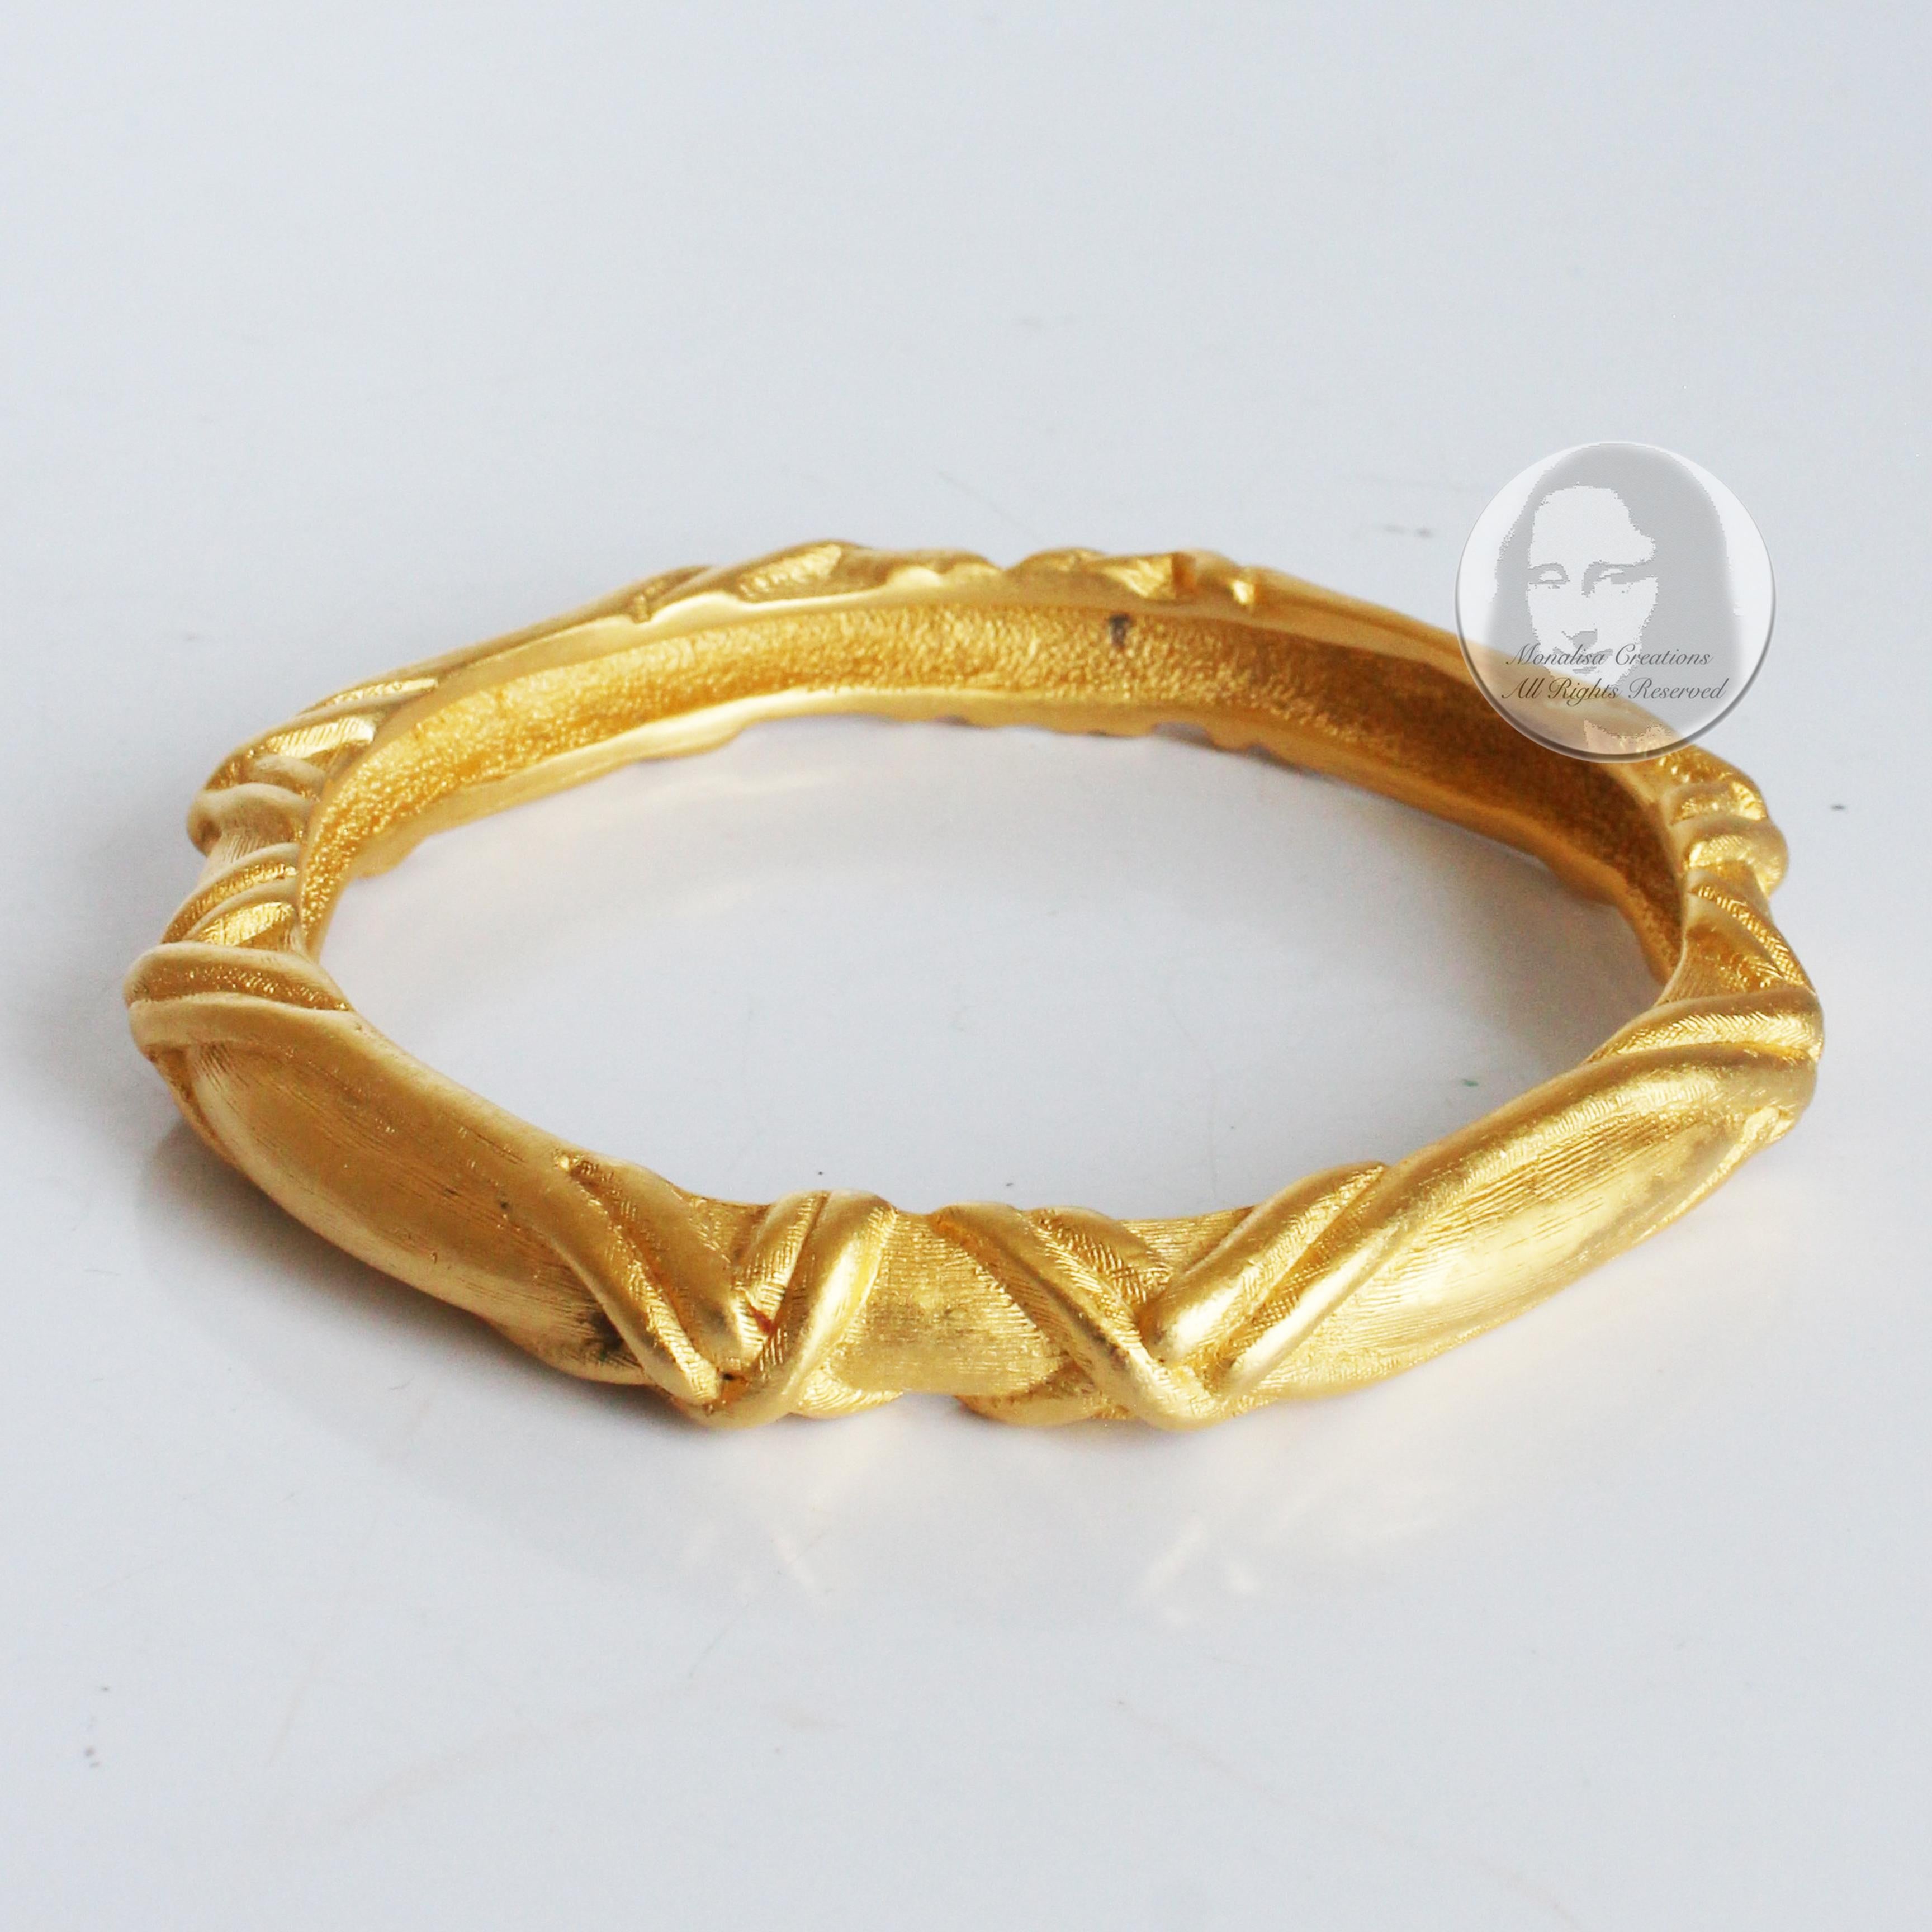 Givenchy Bracelet Bangle Gold Metal Textured Abstract Vintage 80s Jewelry  For Sale 1